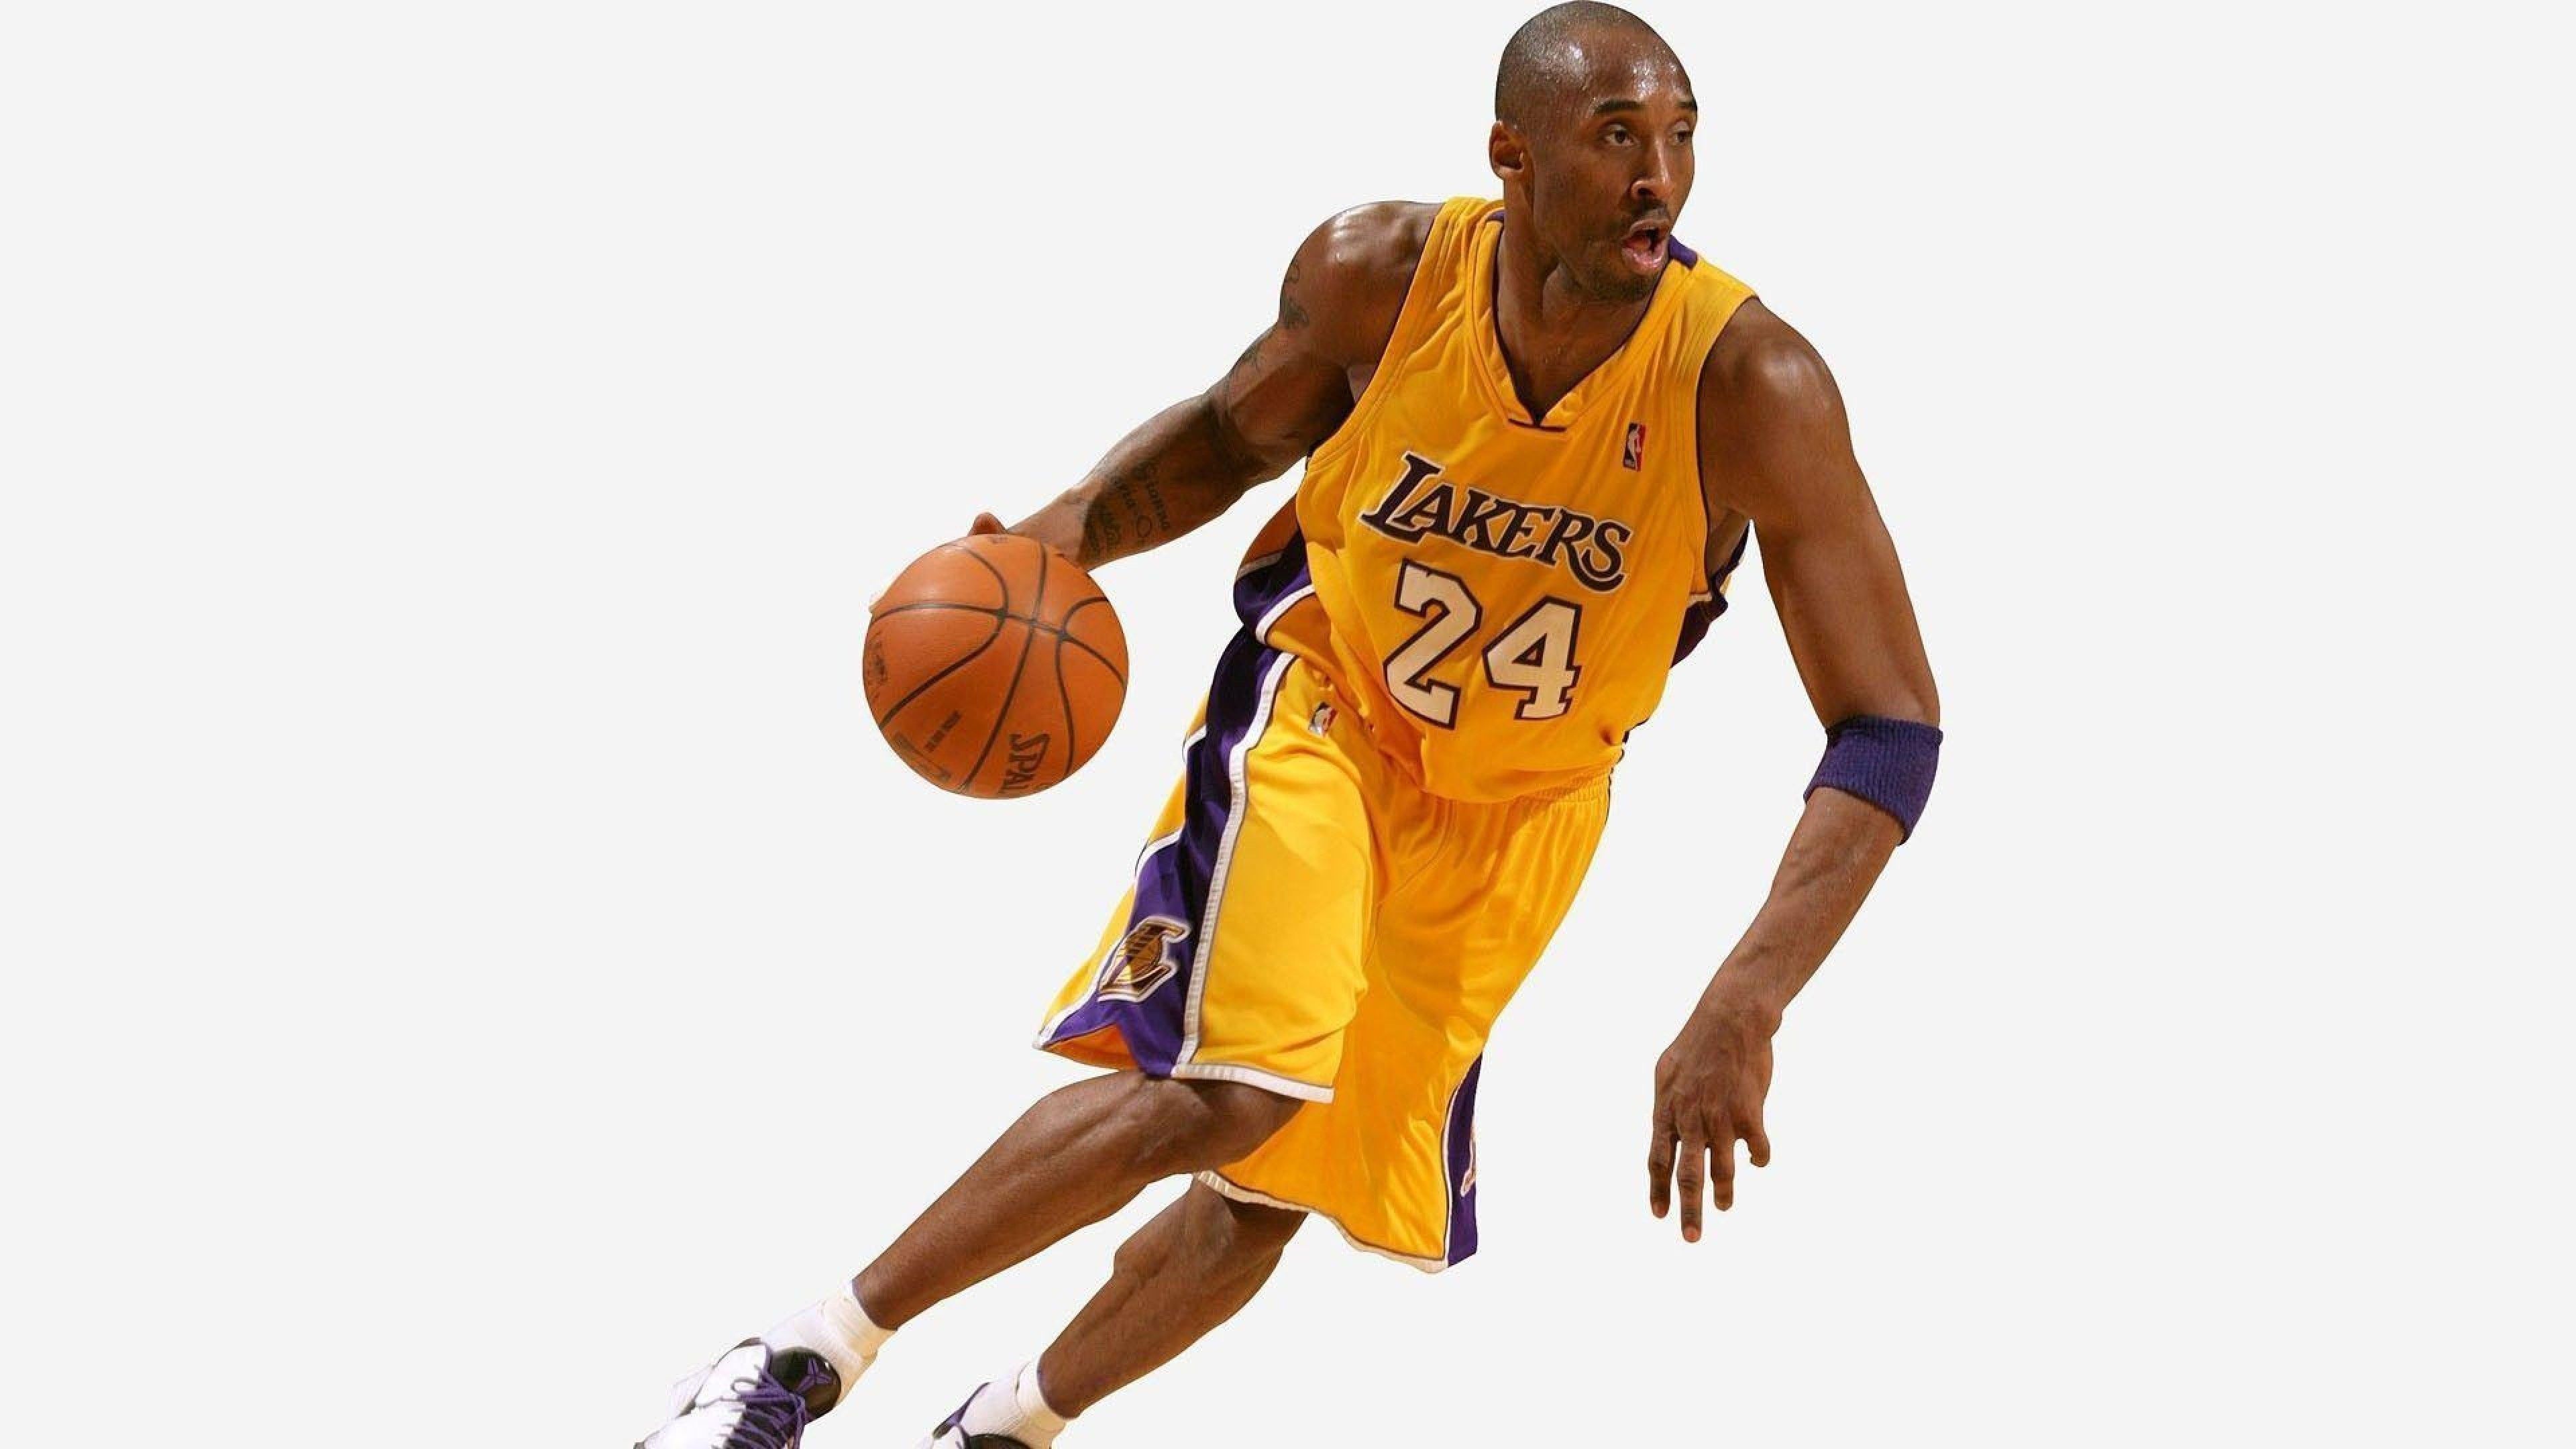 Download 3840x2160 Kobe Bryant, Rest In Peace, Basketball Player, Lakers Wallpaper for UHD TV